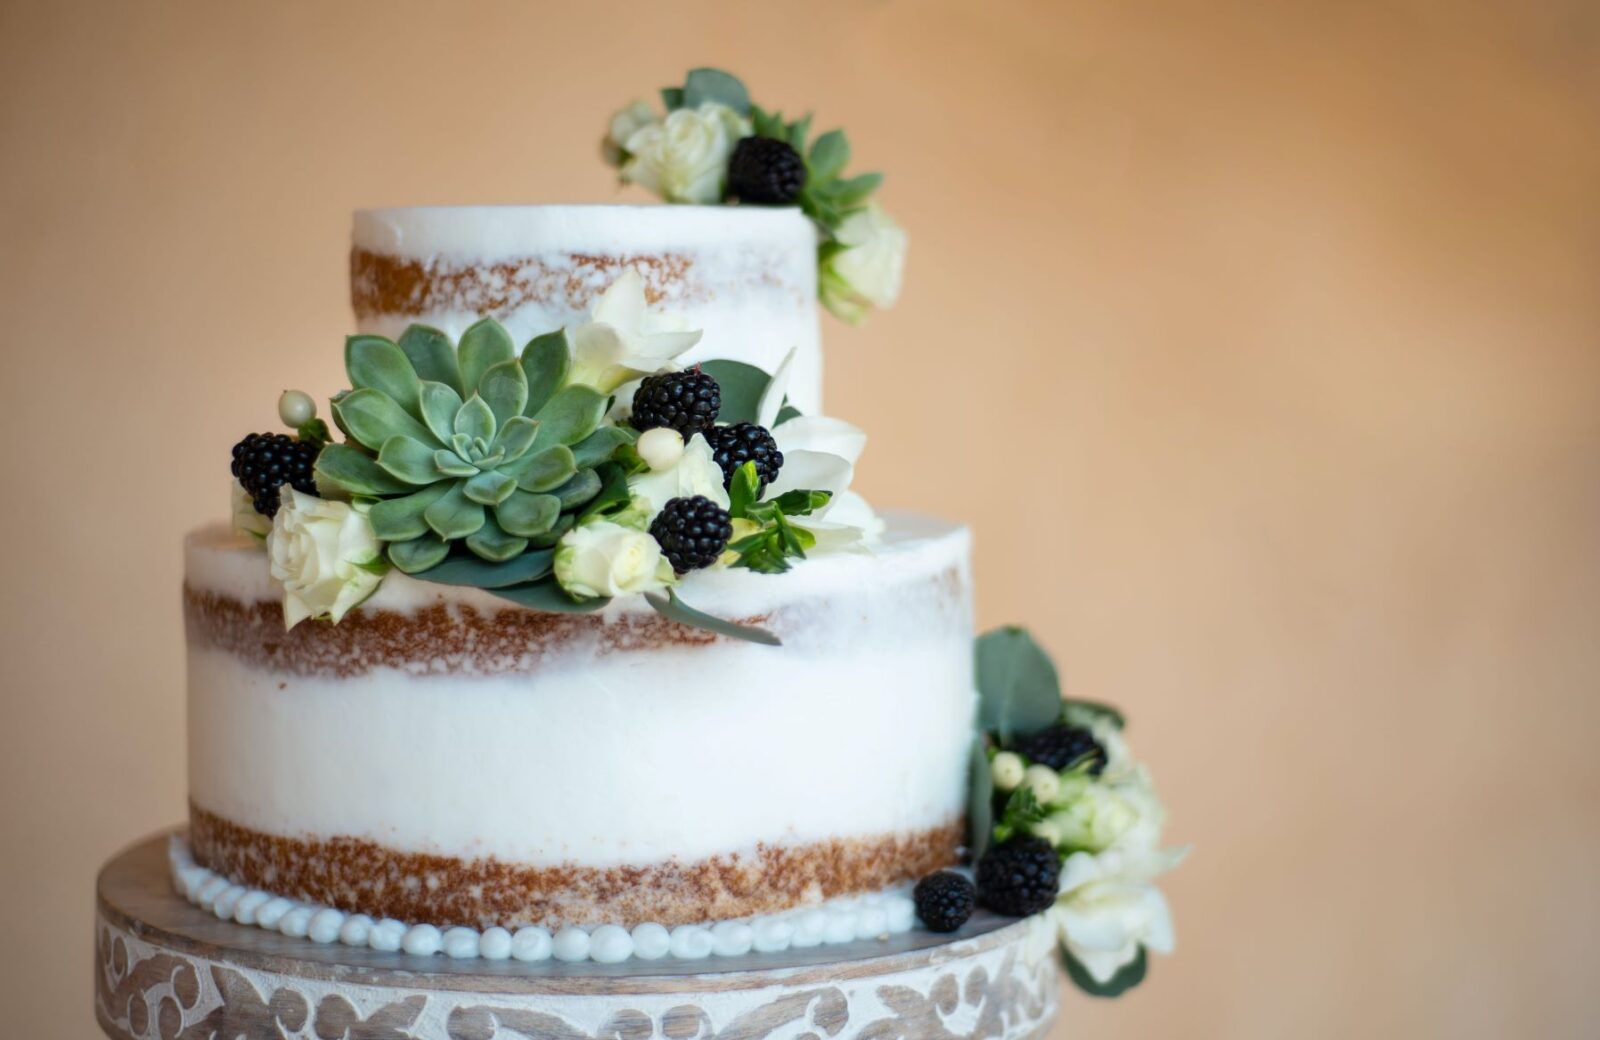 minimalist cake with succulent and blackberry accents